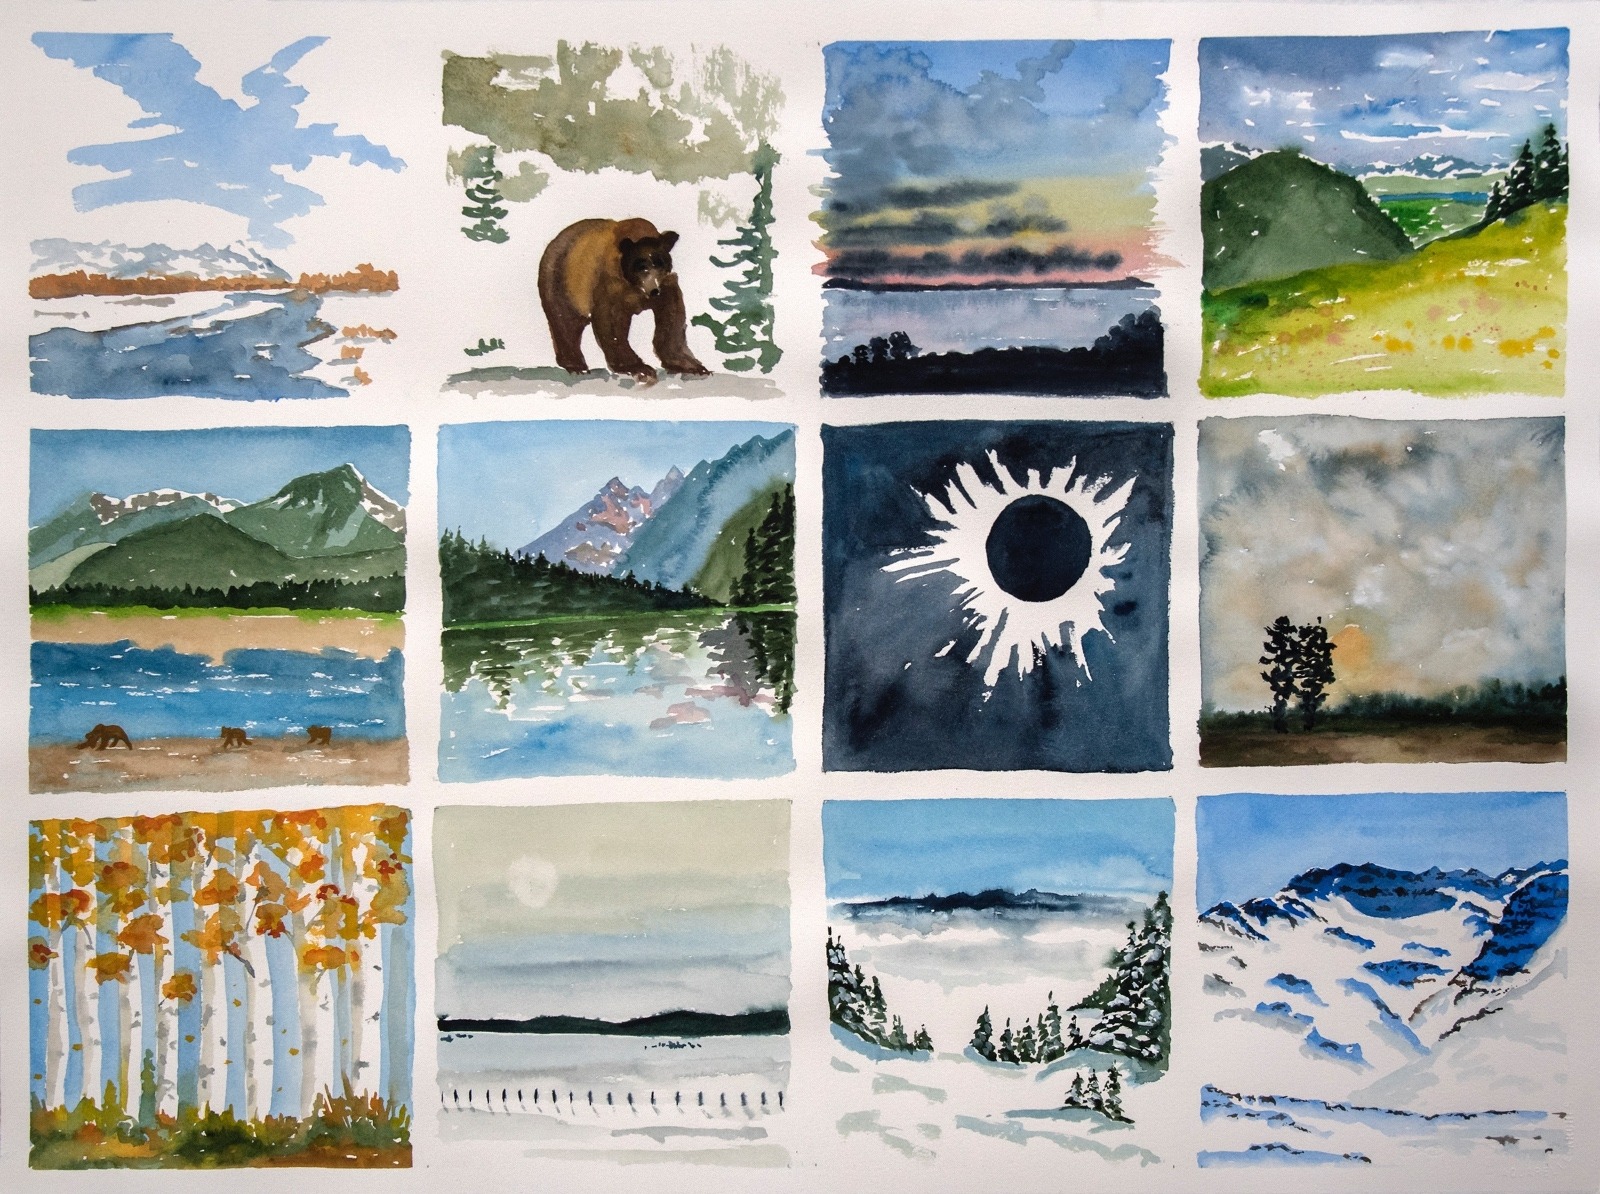 Sue Cedarholm's last watercolor: a composite of a remarkable year, painting every day for "Watercolor Diary"